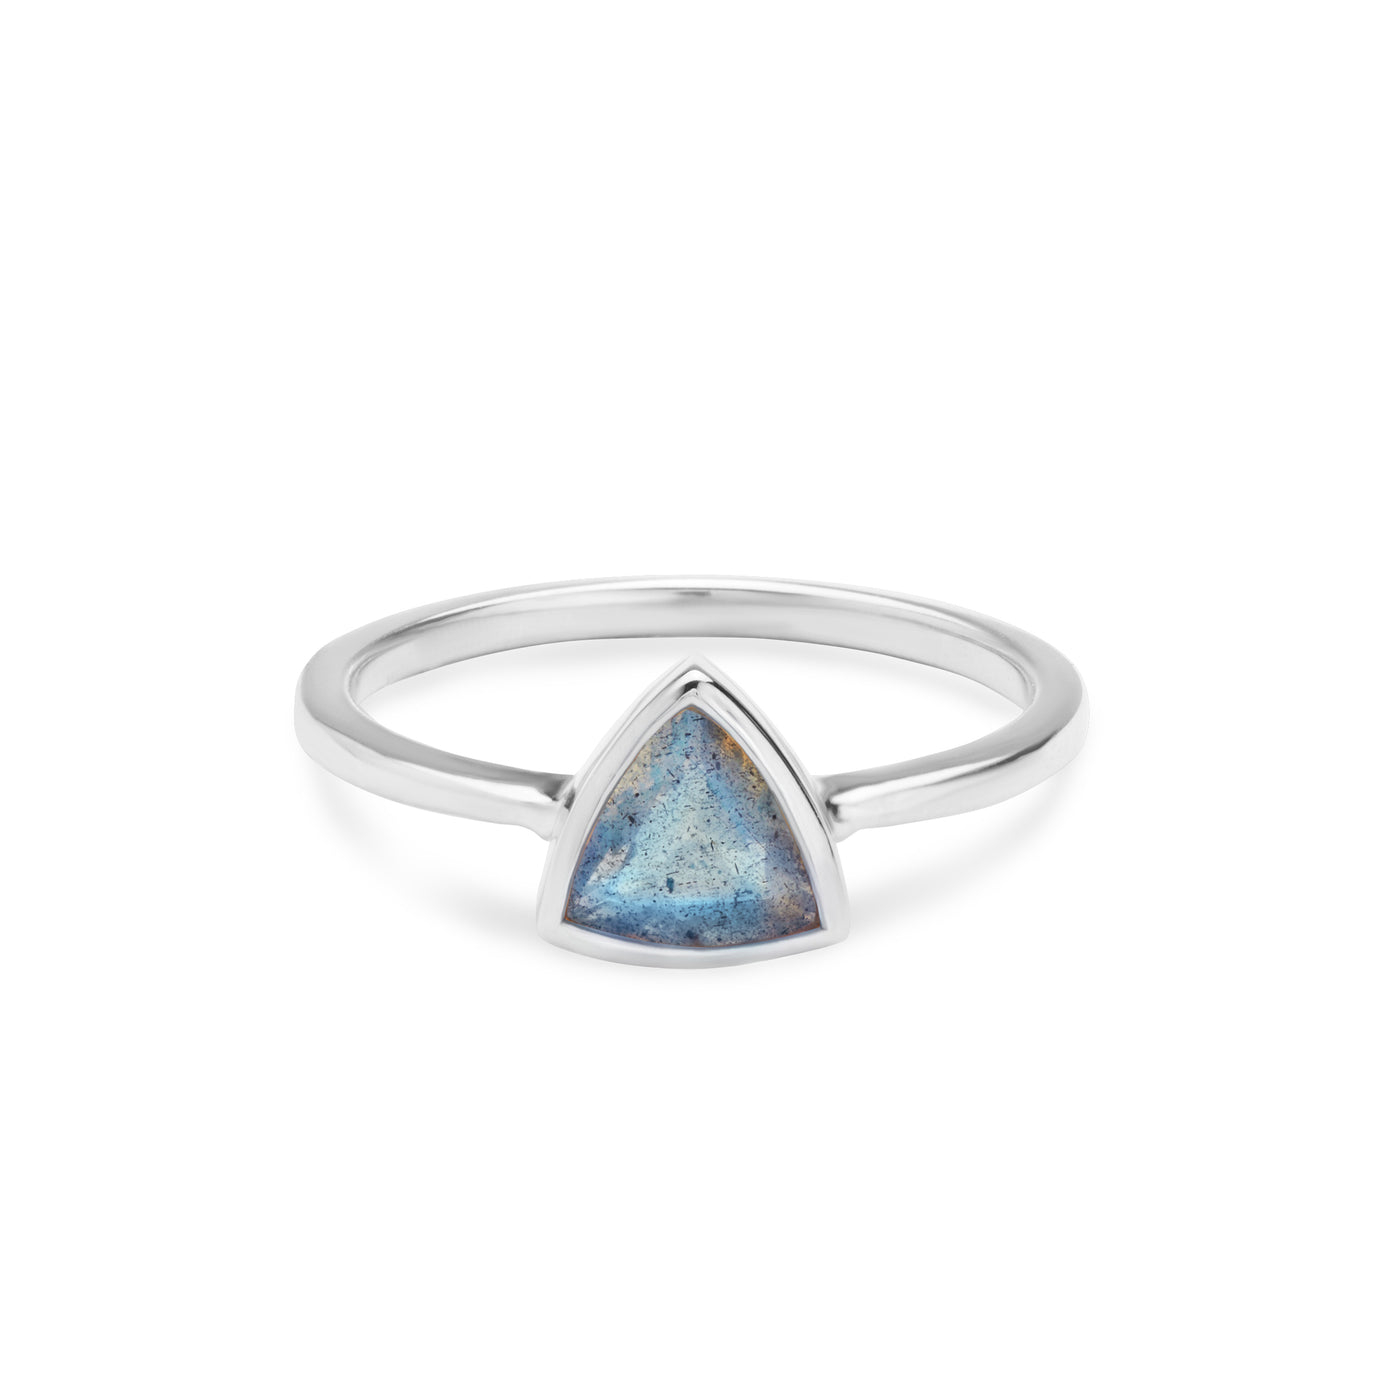 14k White Gold Ring with Blue Labradorite in Triangle Shape laying Flat on White Background